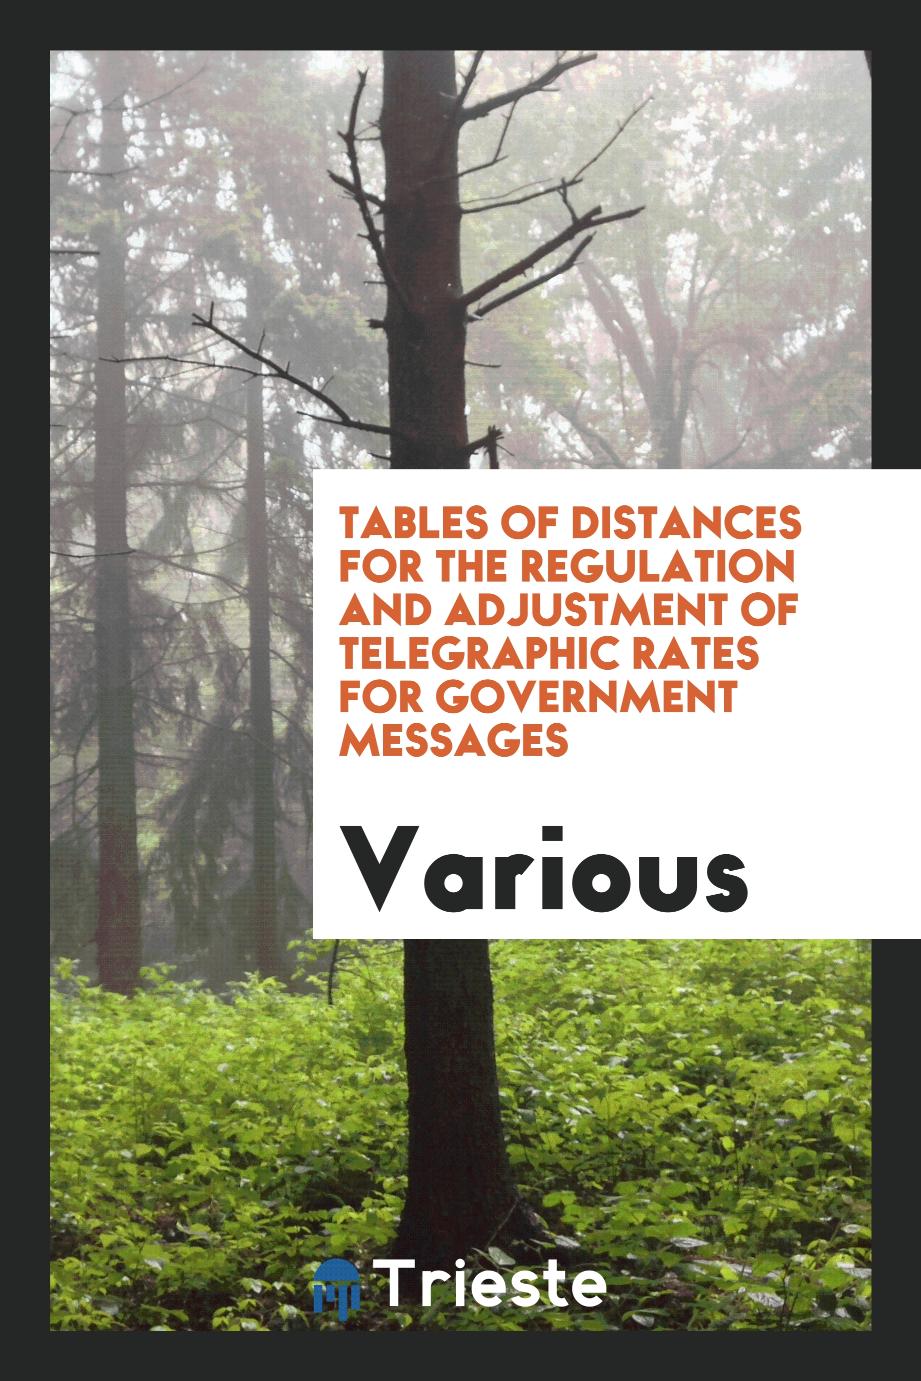 Tables of Distances for the Regulation and Adjustment of Telegraphic Rates for Government Messages